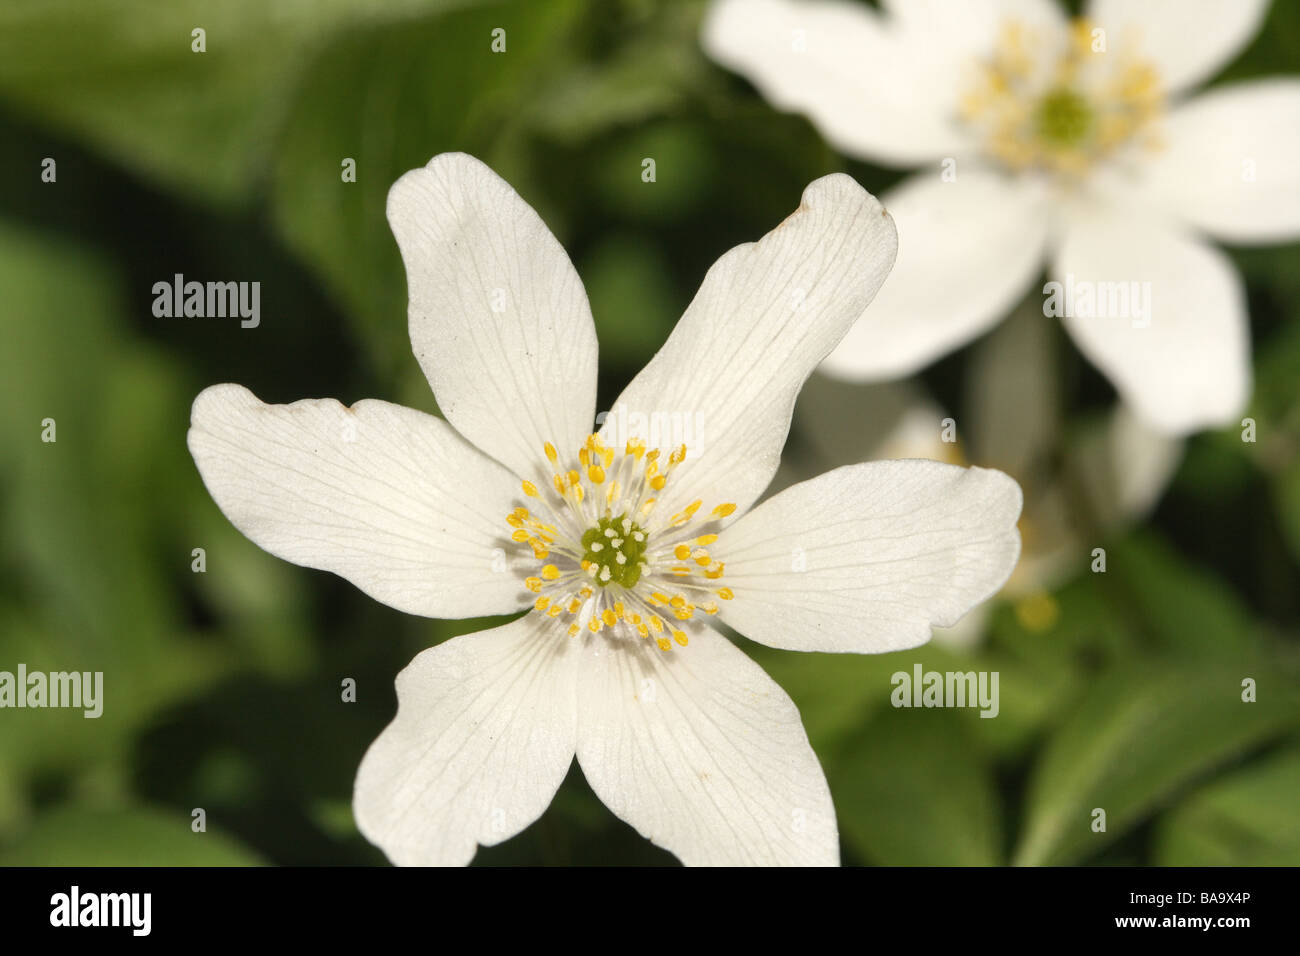 Wood Anemone Anemone nemerosa Family Ranunculaceae flower in close up macro showing flower detail and veination on petals. Stock Photo